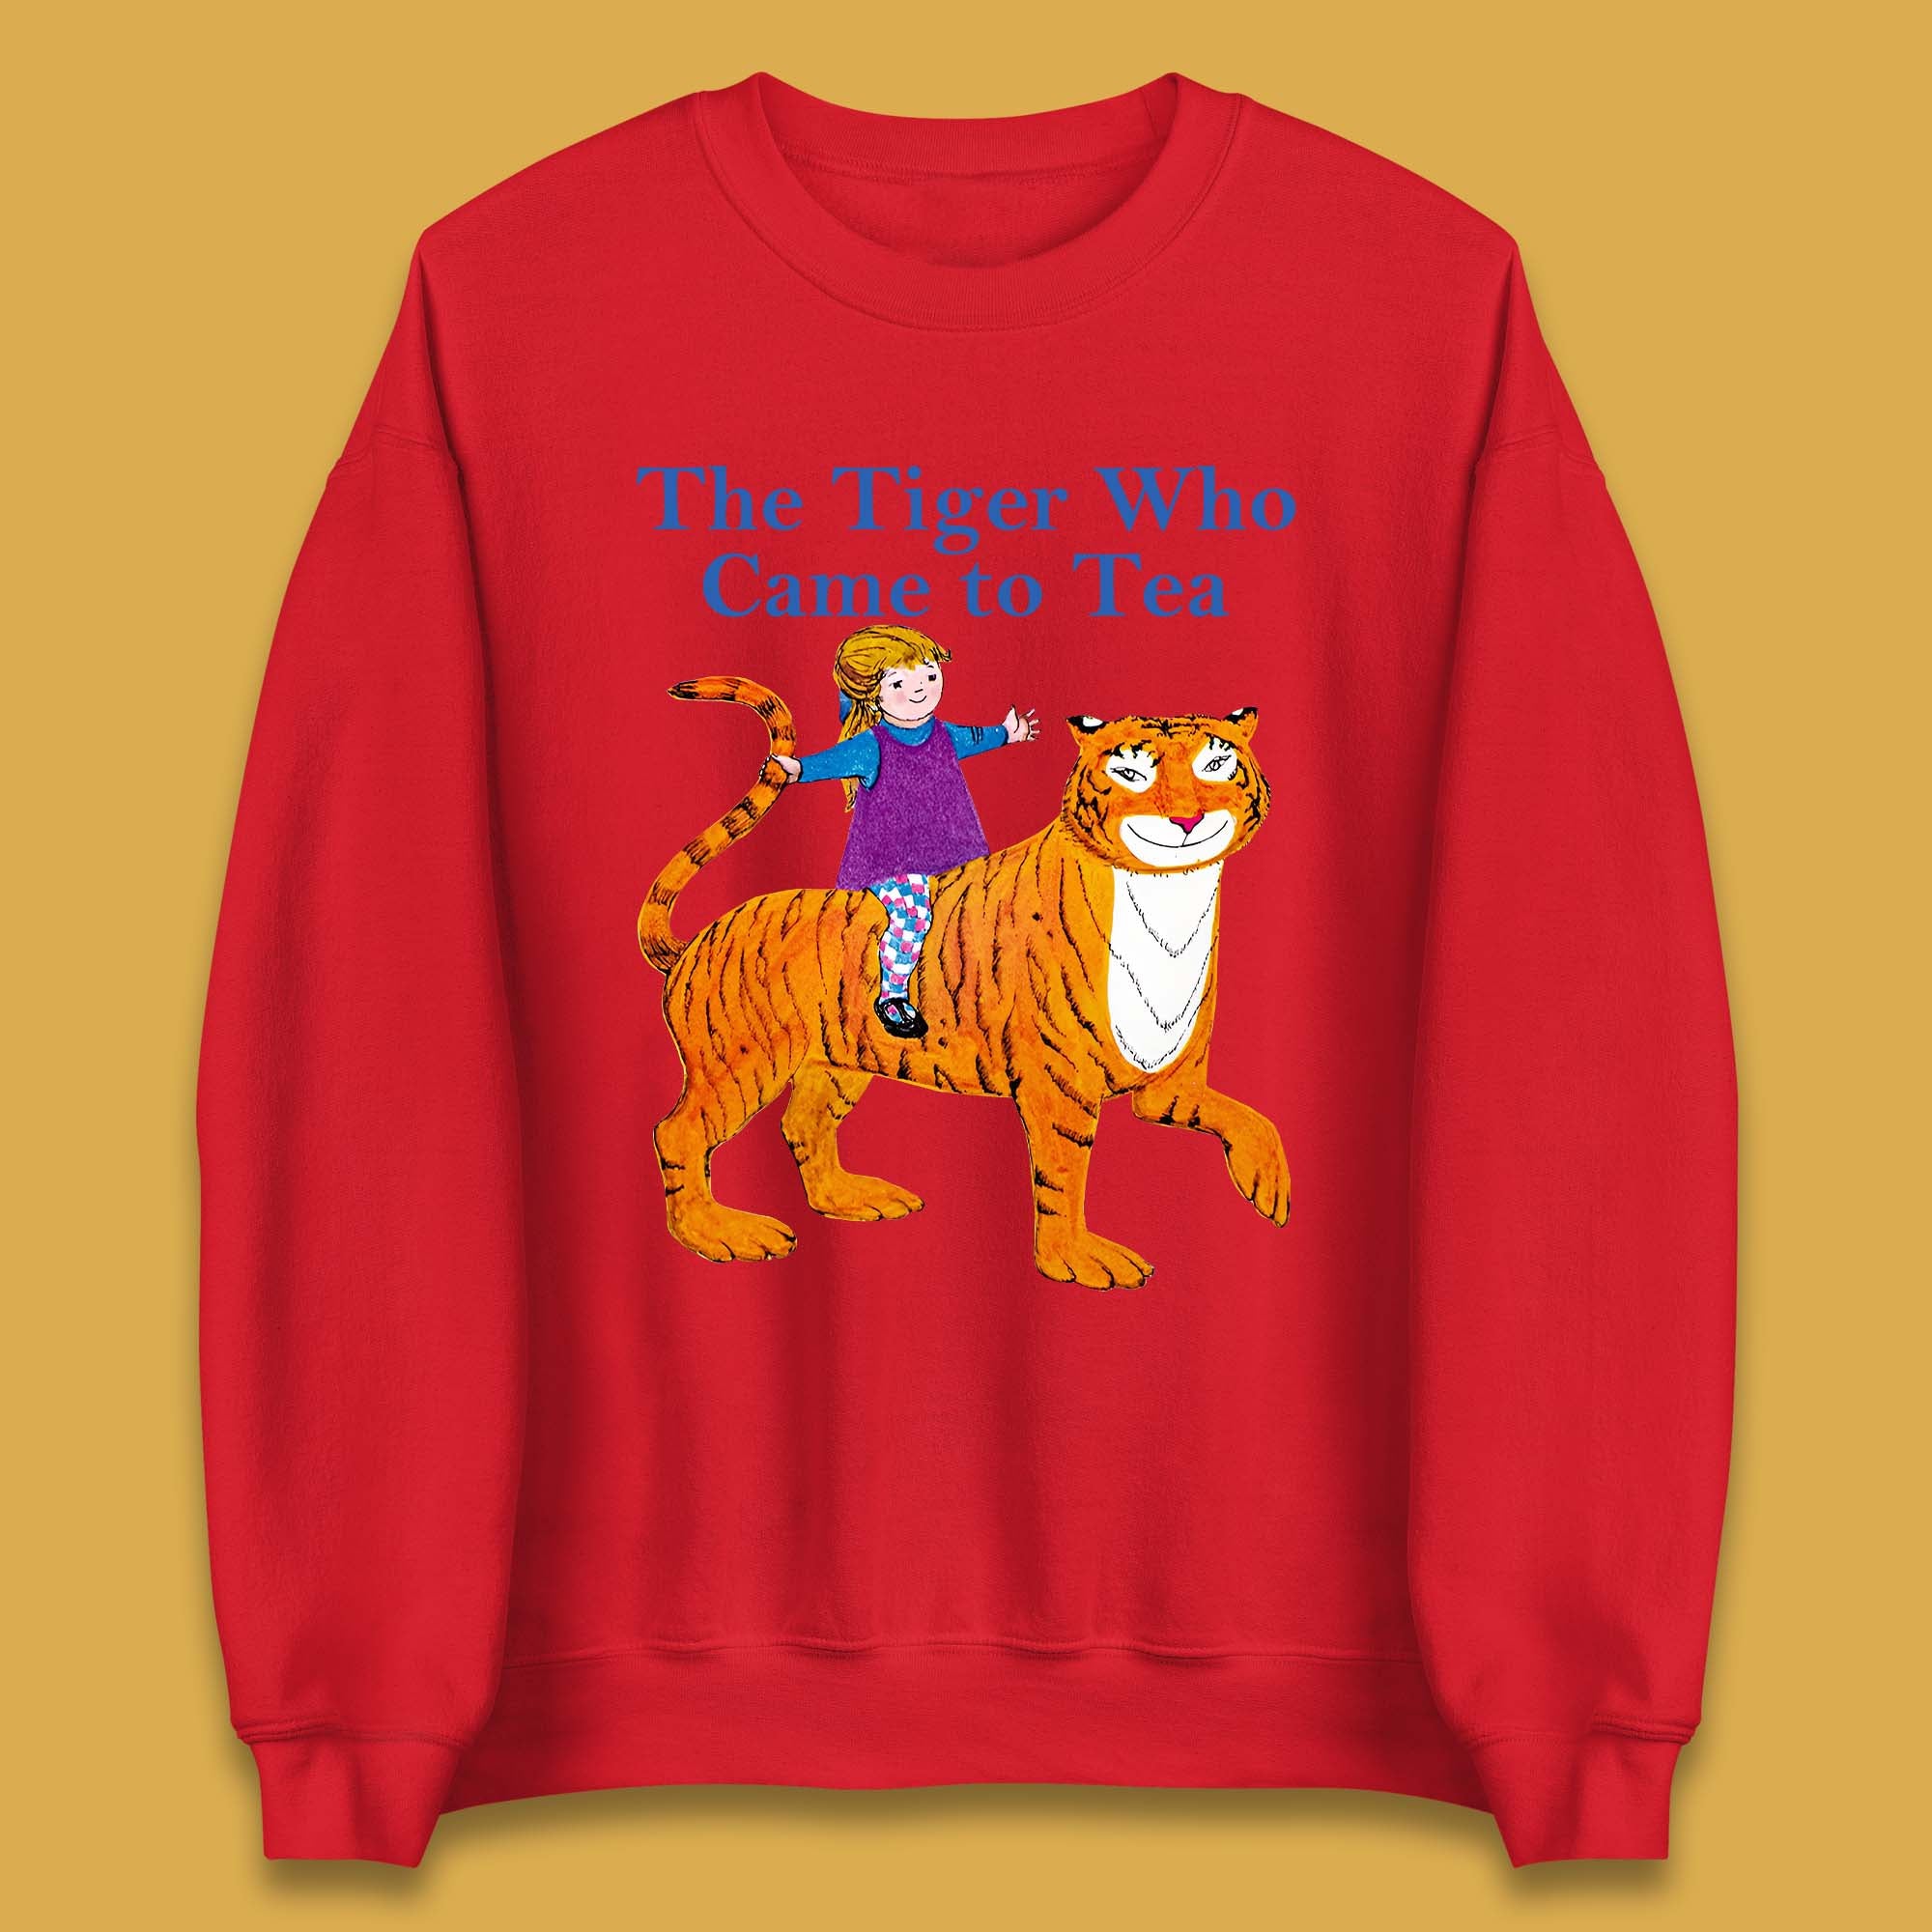 The Tiger Who Came To Tea Book Day Unisex Sweatshirt